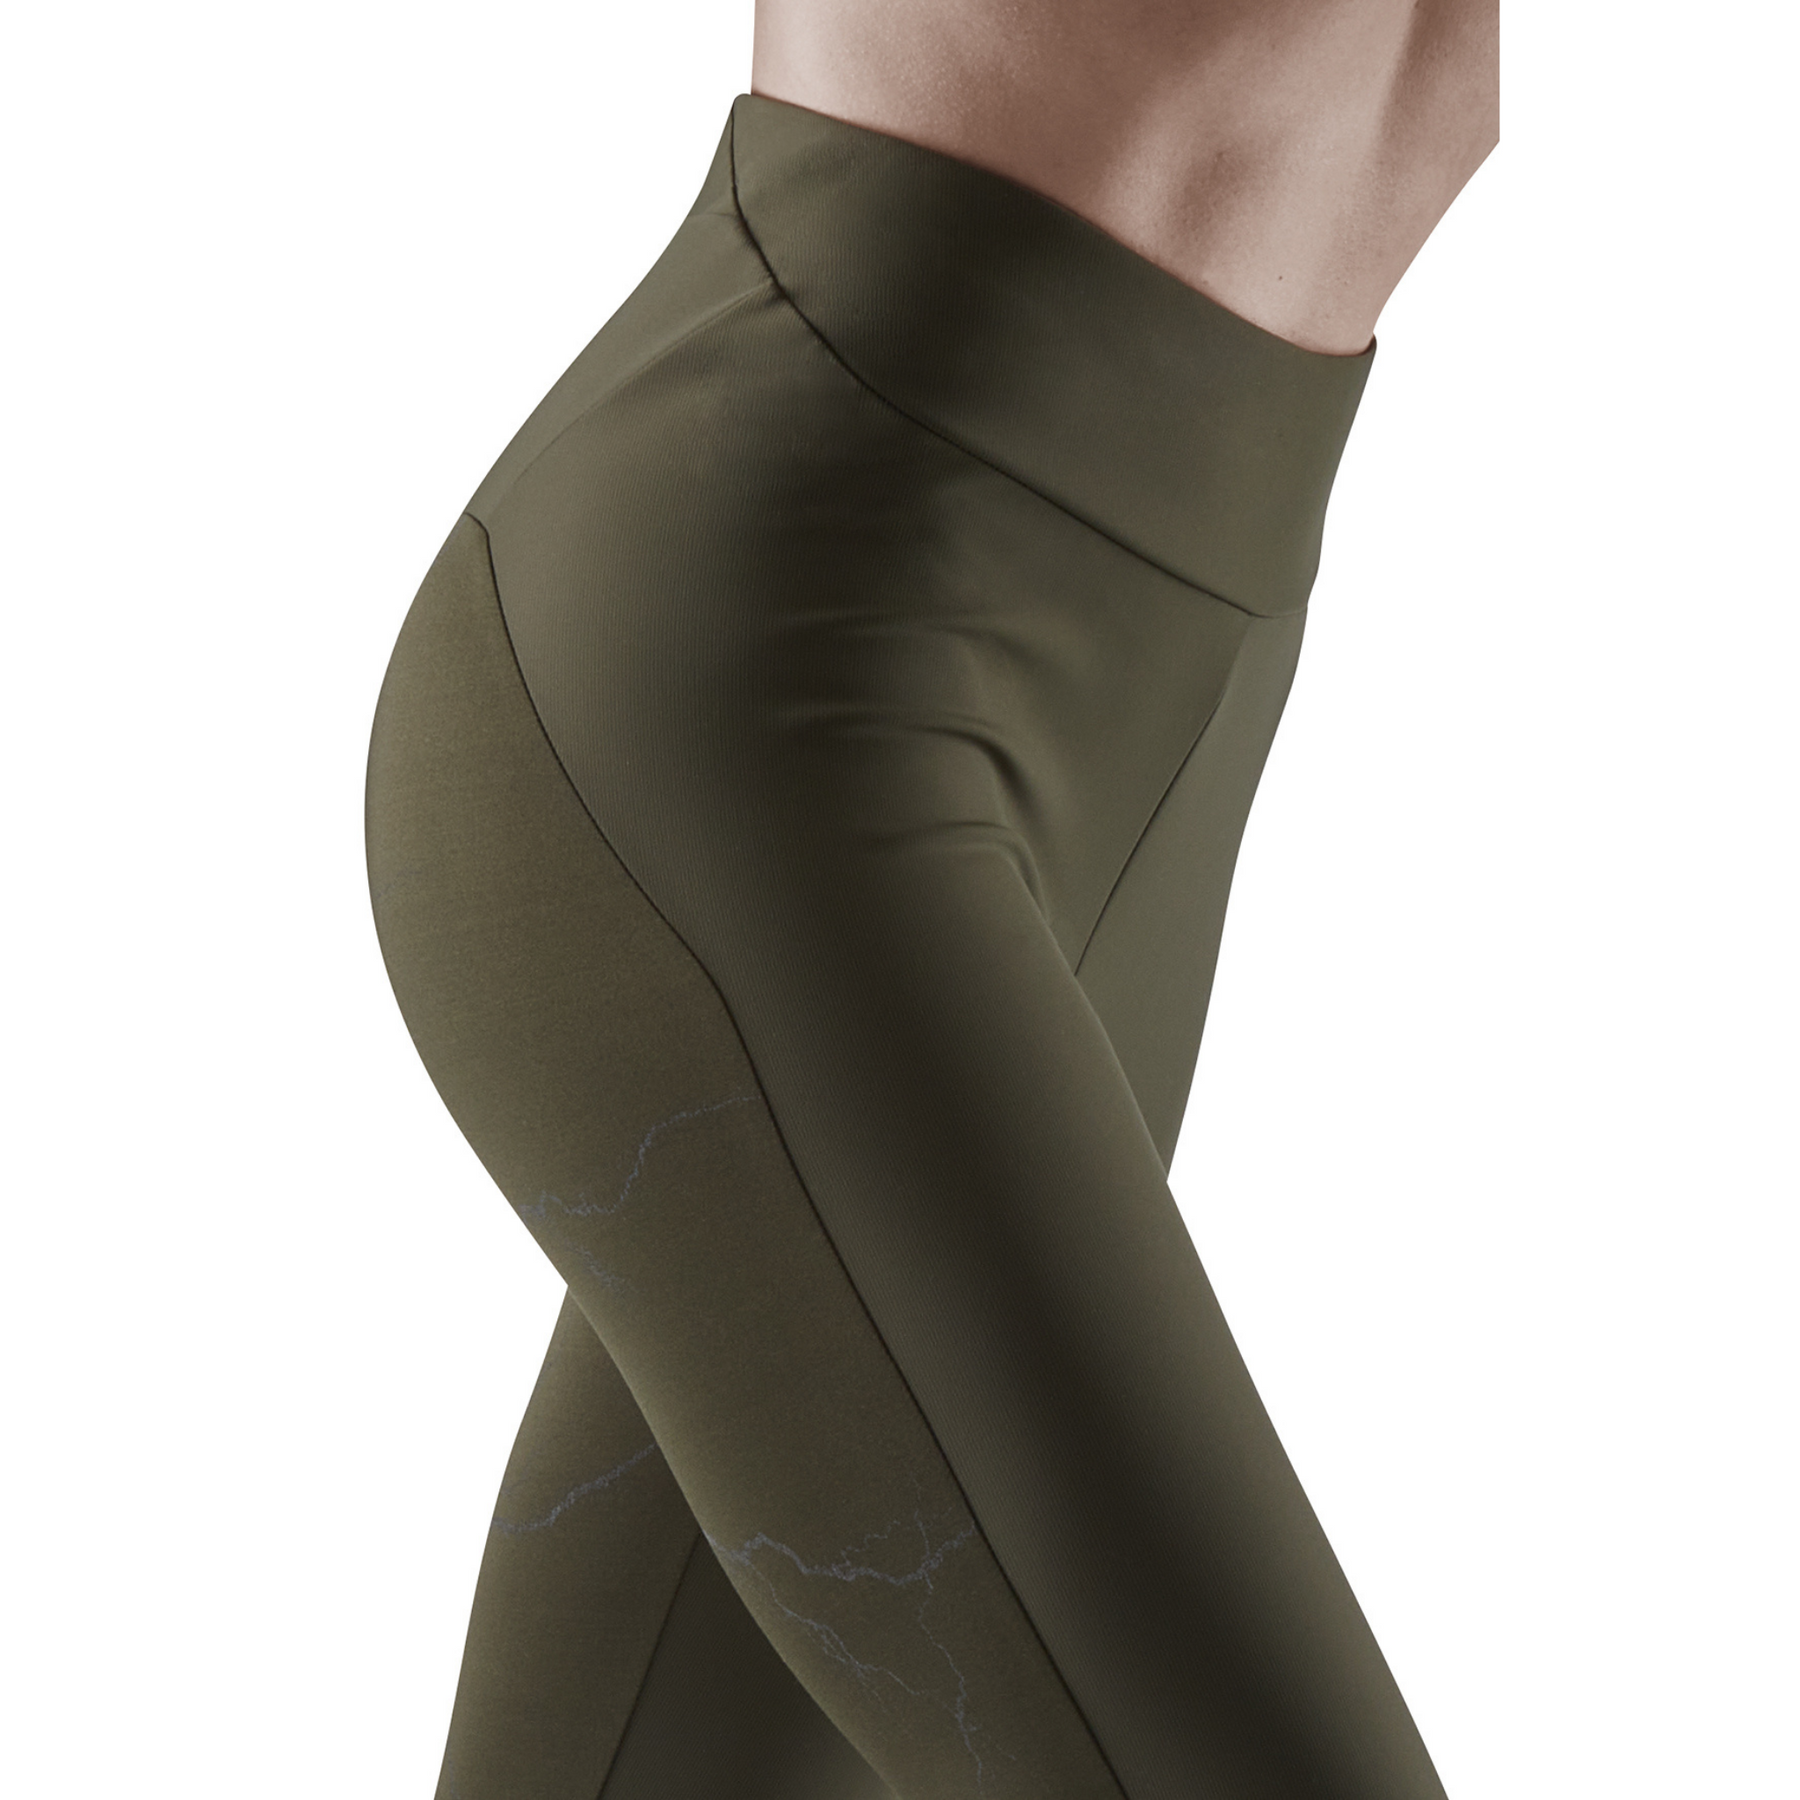 Reflective Tights for Women  CEP Activating Compression